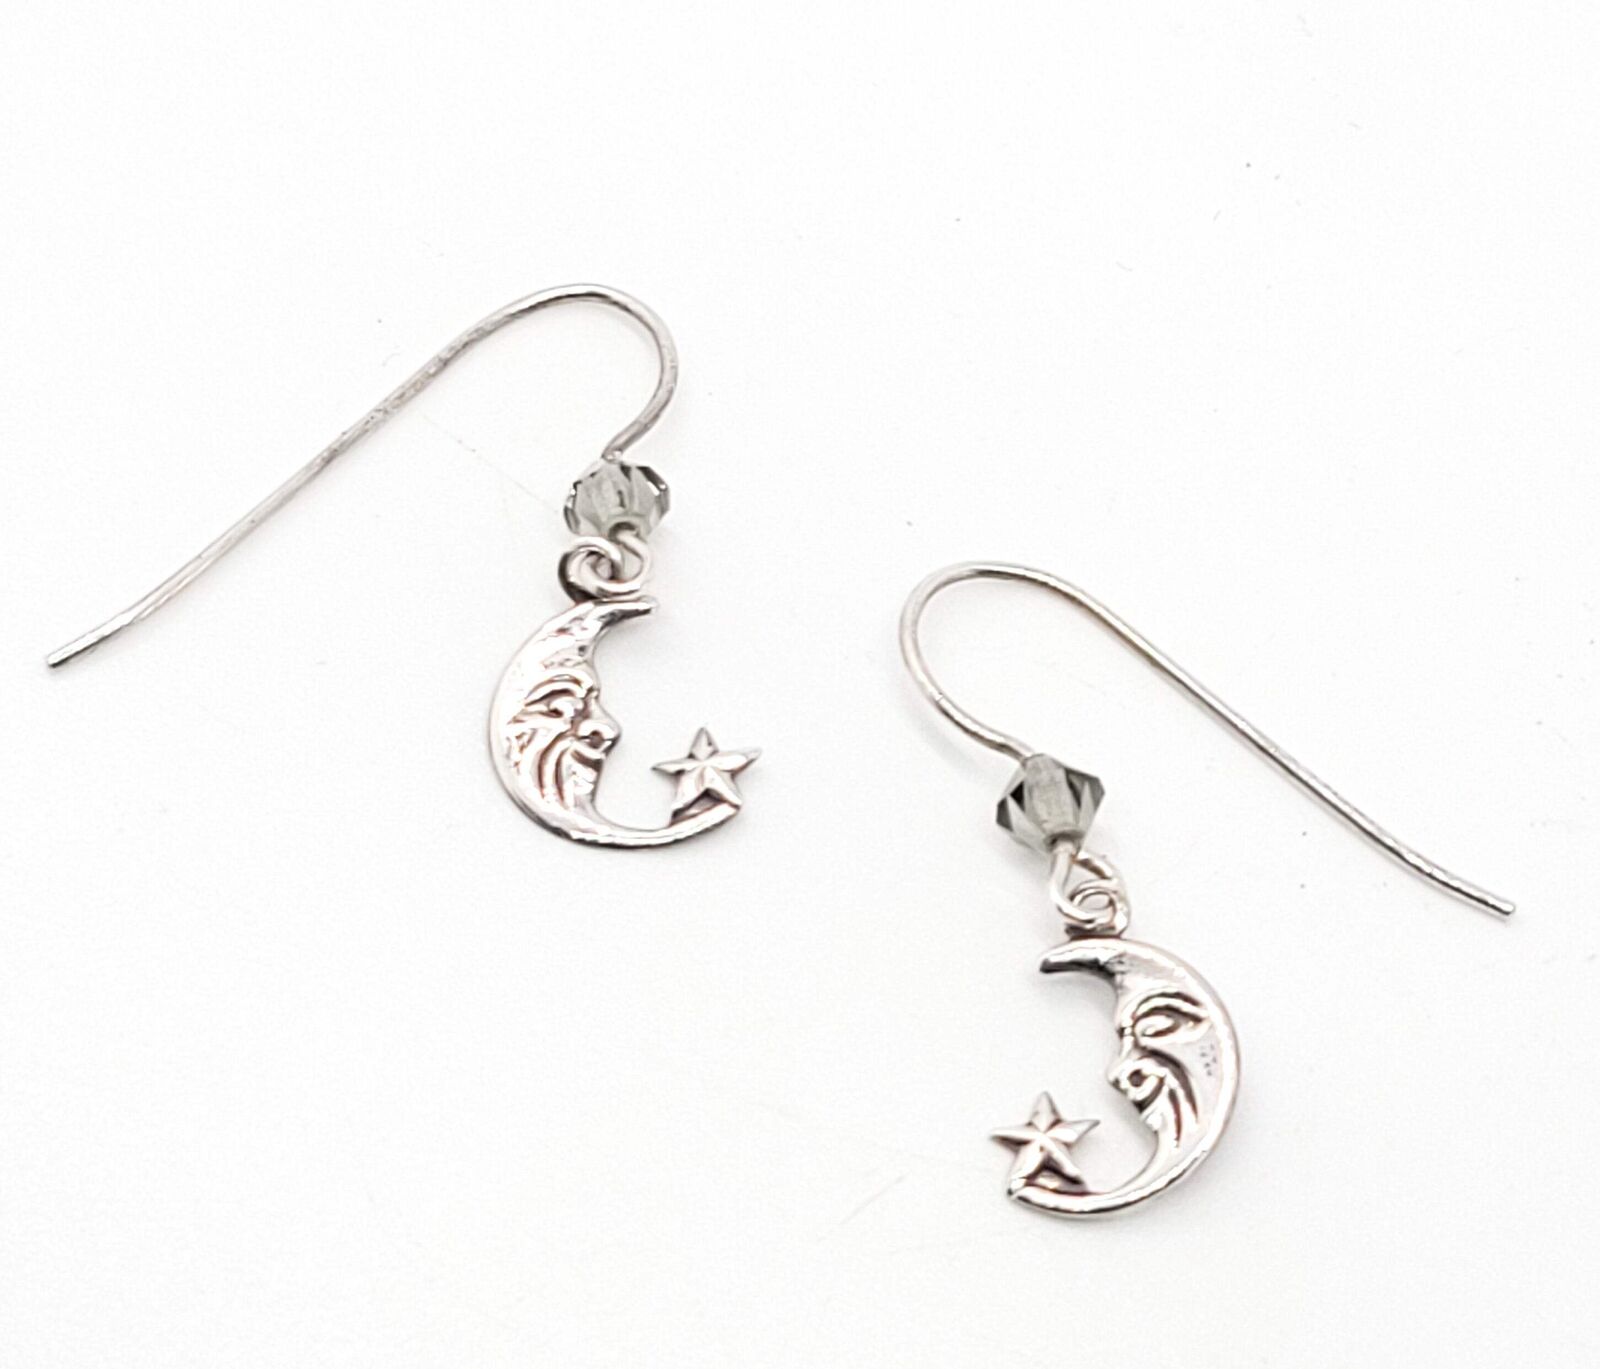 Man in the Moon celstial crescent moon and star sterling silver vintage earrings